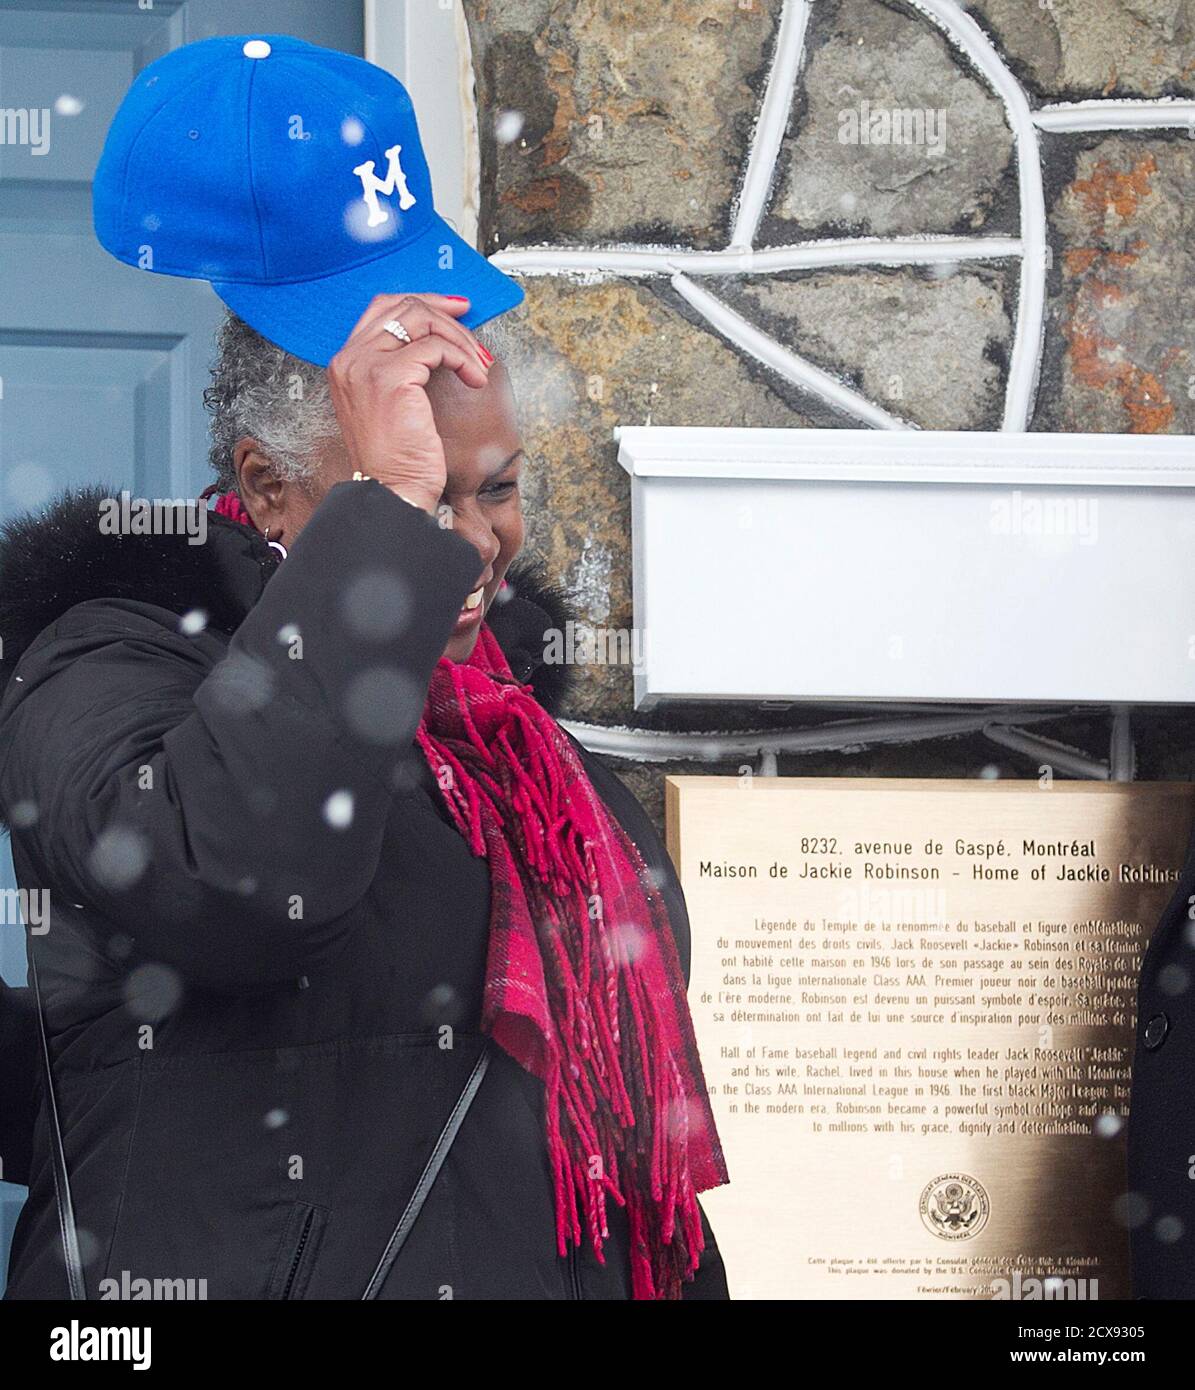 Sharon Robinson takes off a Montreal Royals baseball cap after the  unveiling of a plaque outside the residence that her father Jackie Robinson  called home in Montreal February 28, 2011. Jackie Robinson